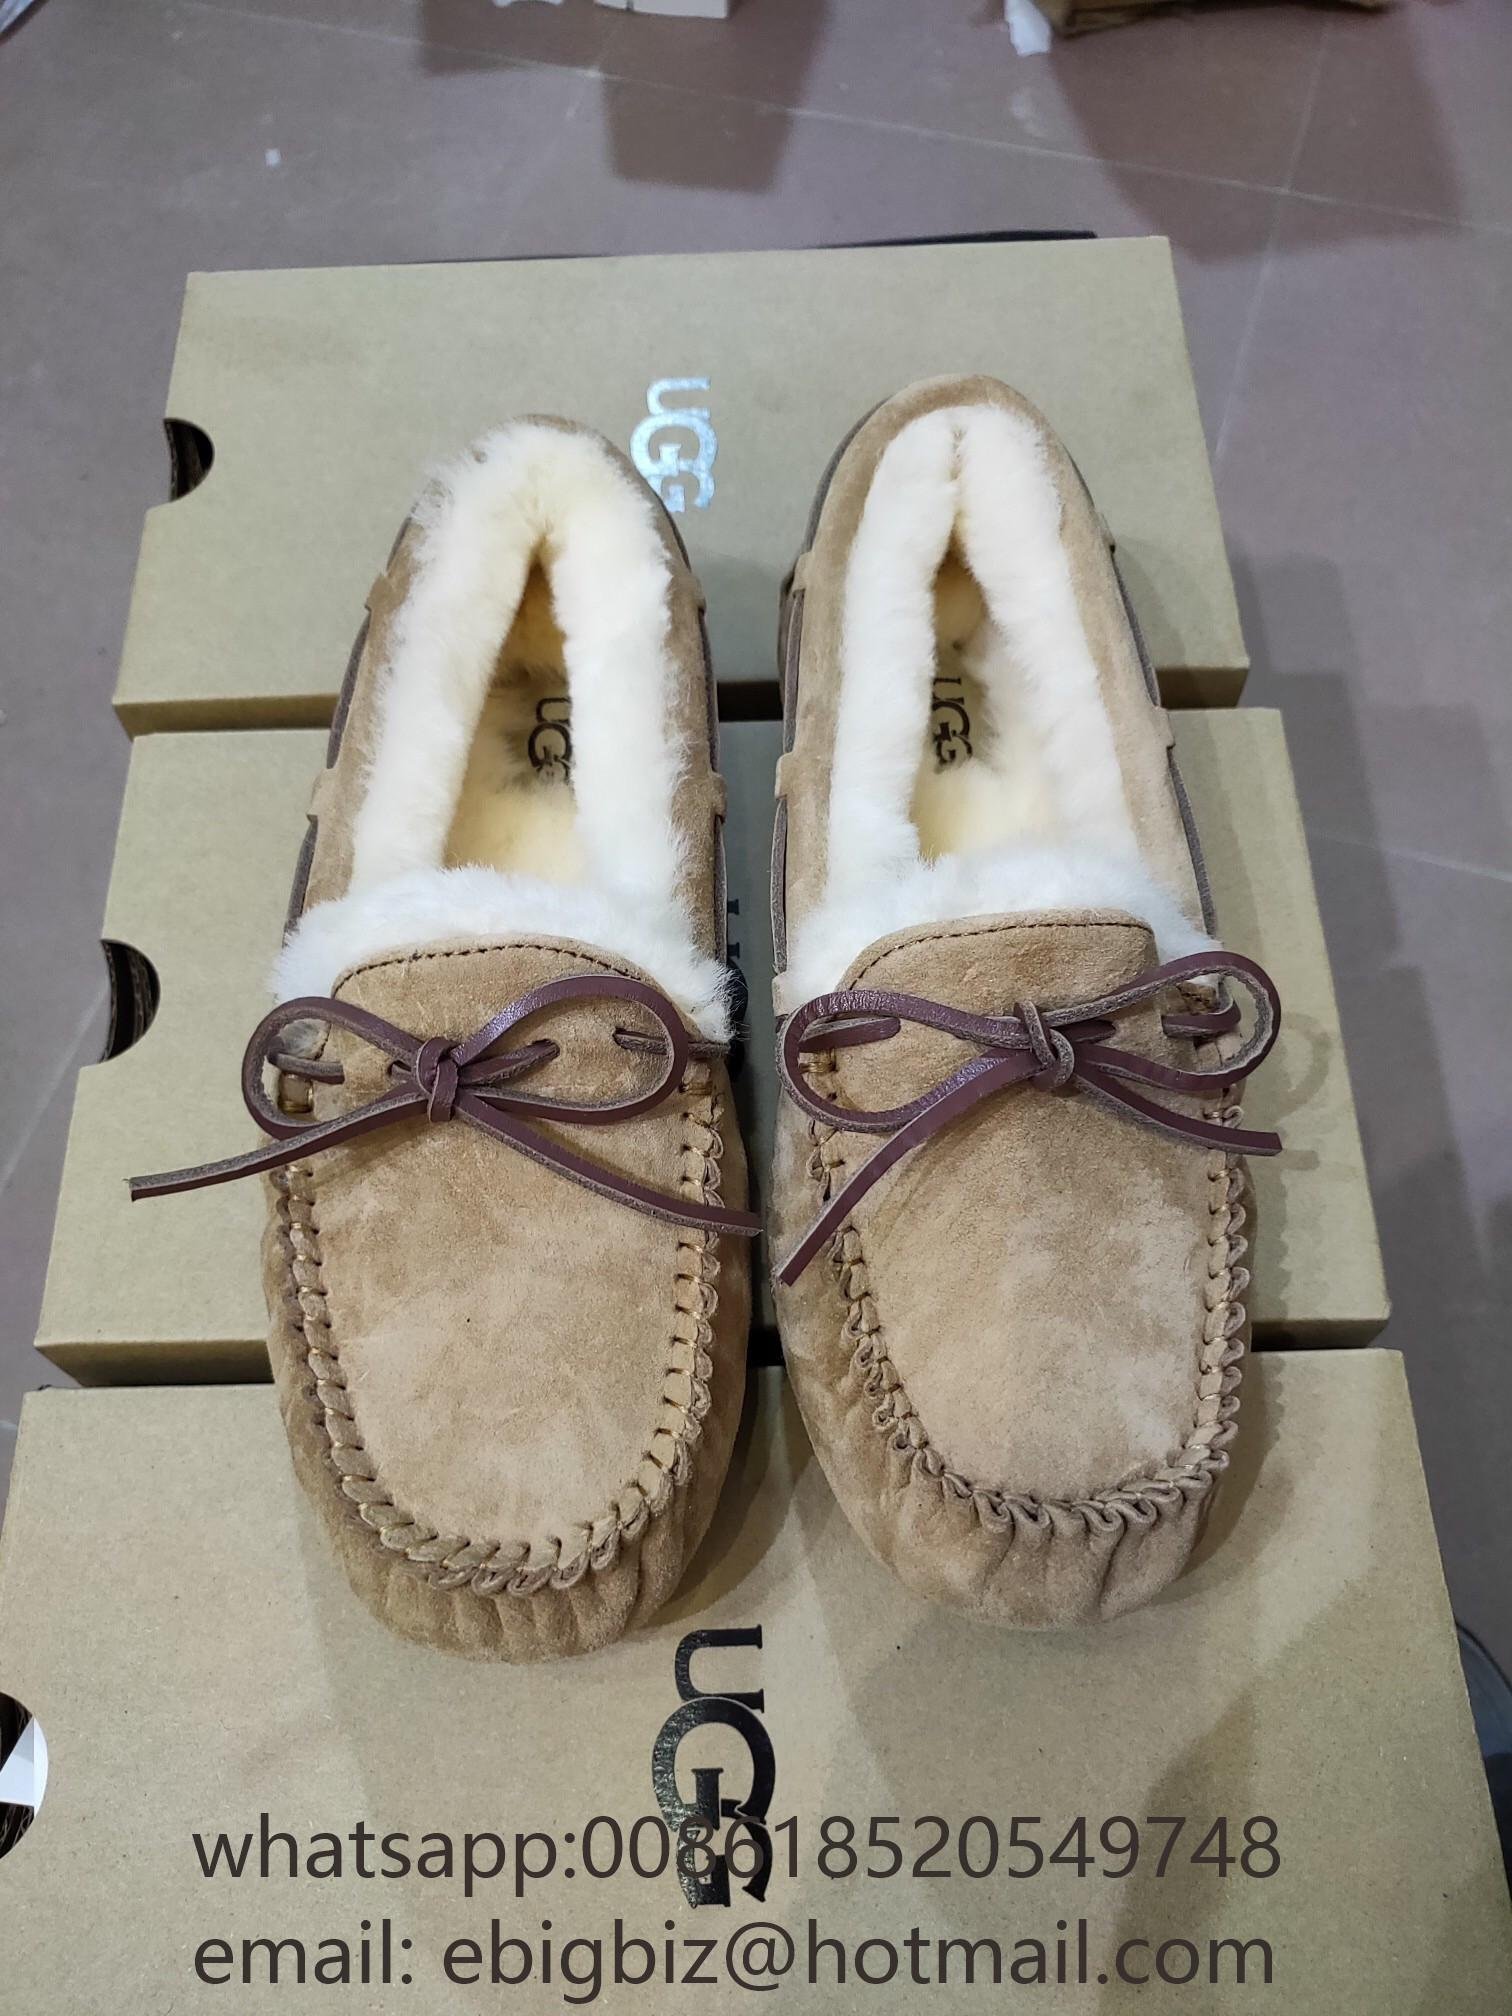 Wholesale Cheap Ugg boots discount Ugg shoes on sale Ugg slippers Ugg flats (China Trading ...